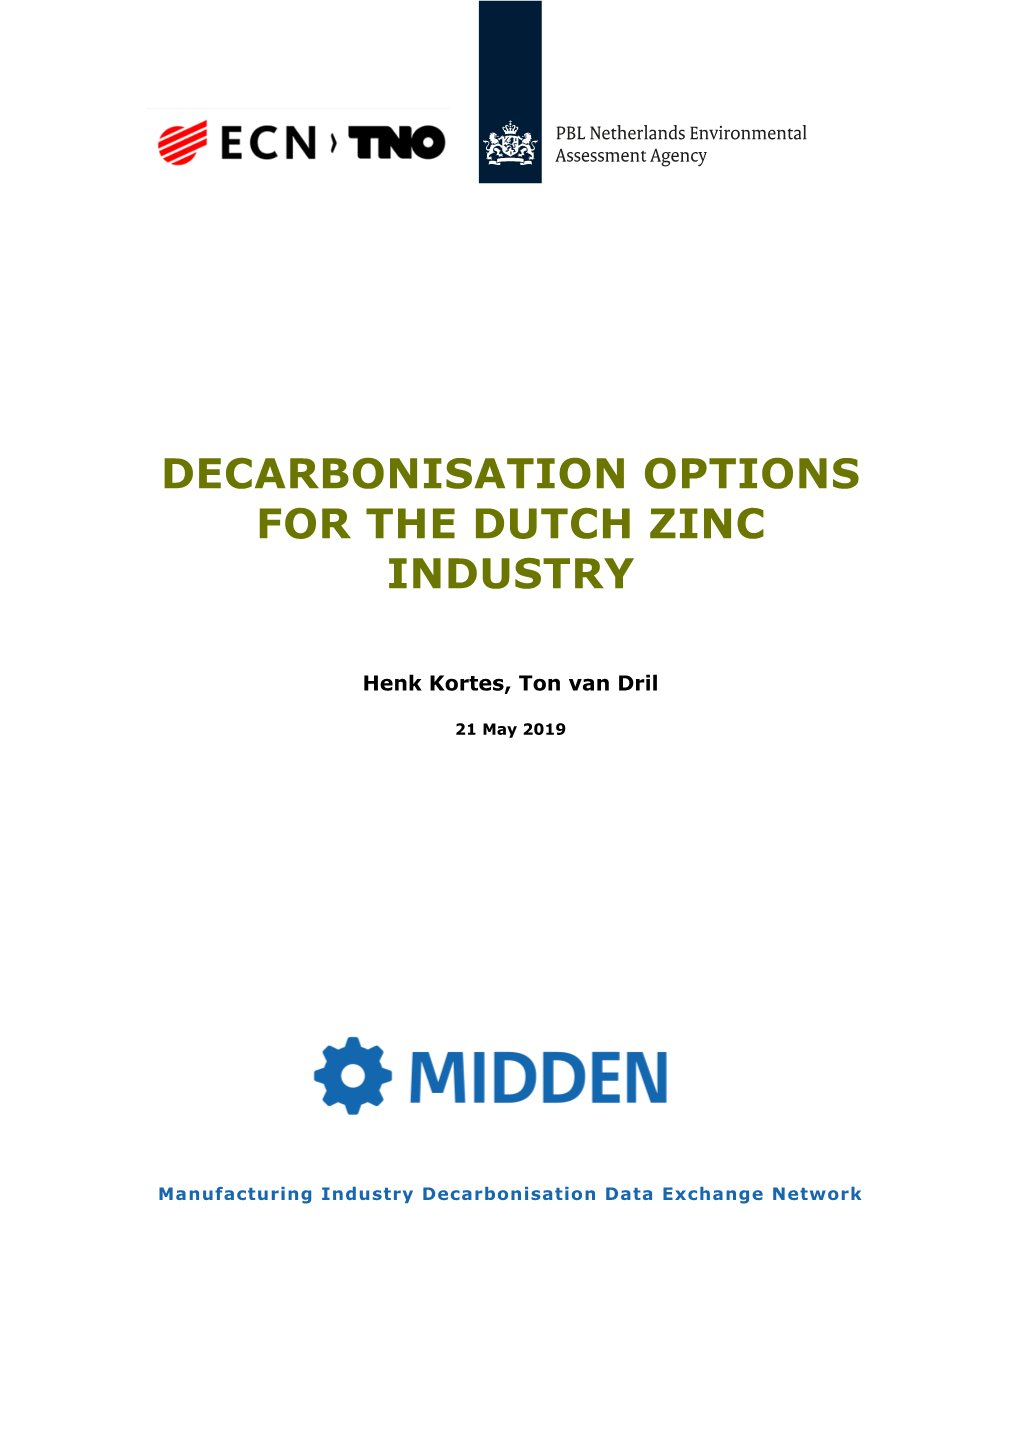 Decarbonisation Options for the Dutch Zinc Industry